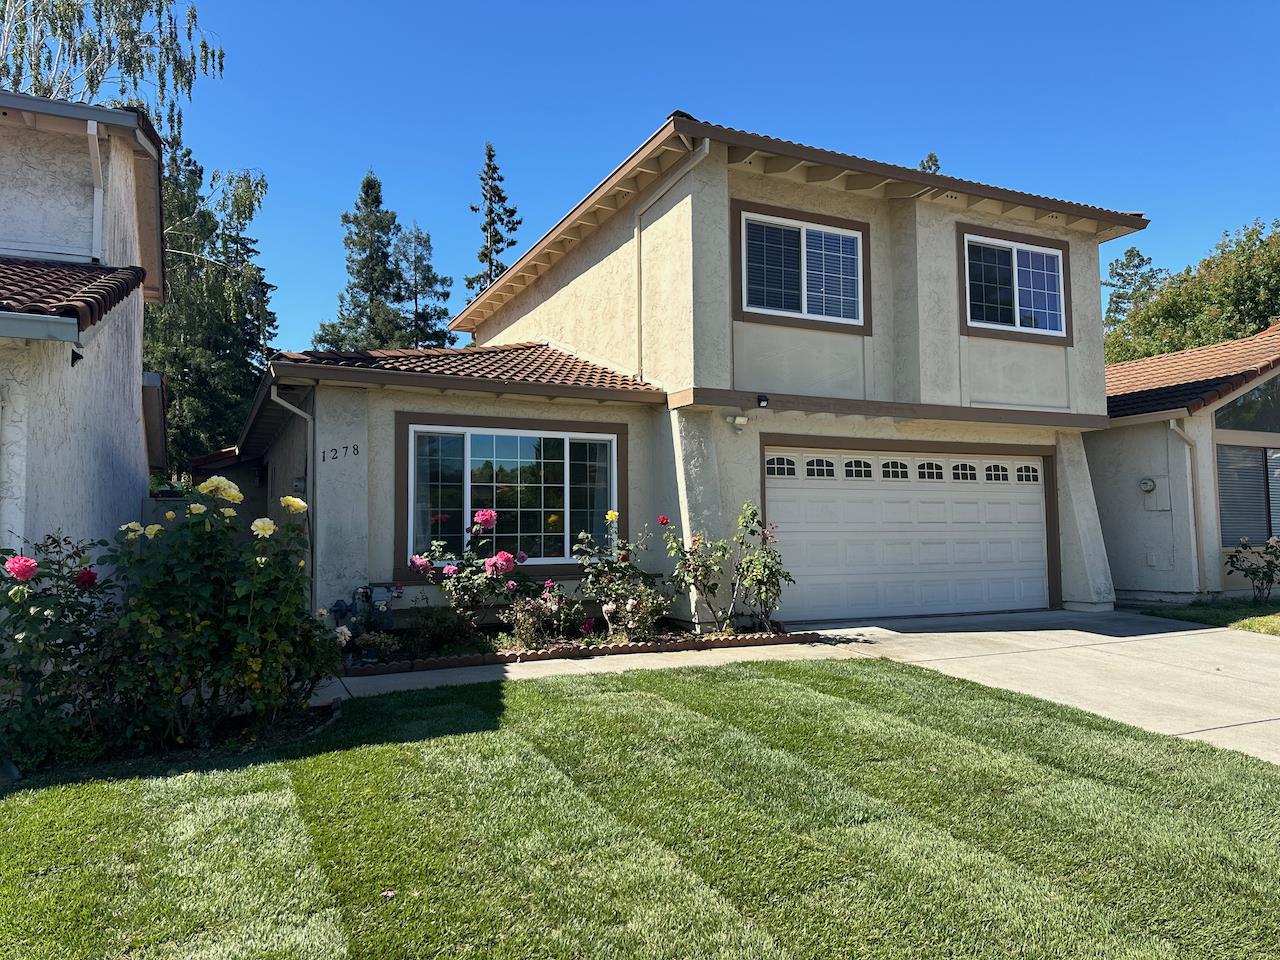 Photo of 1278 Willowhaven Dr in San Jose, CA